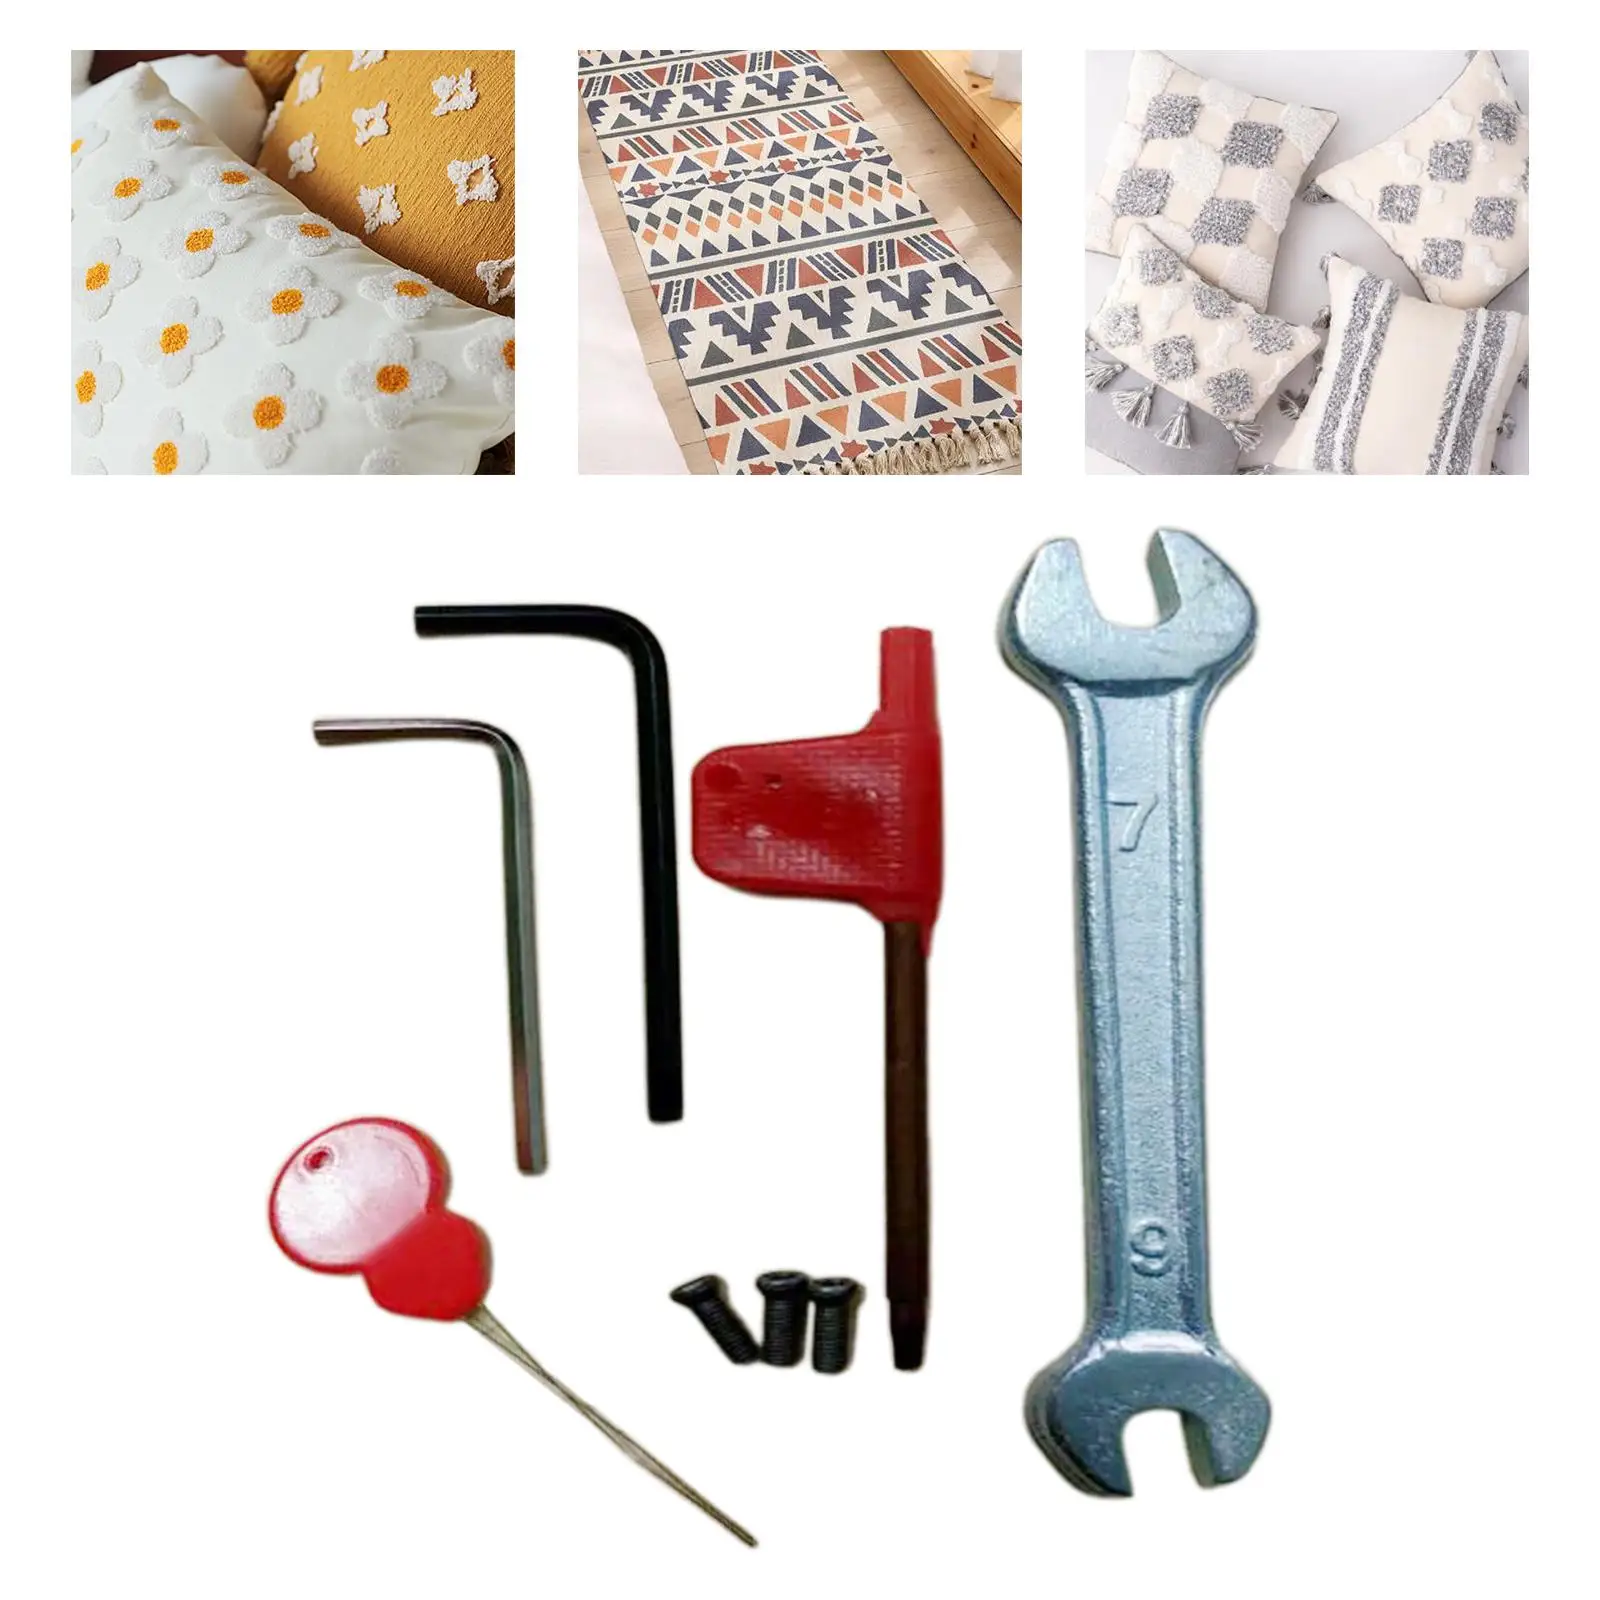 Durable   Tool Set Home Rugs Embroidery Knitting Making Craft DIY Supplies Replacement Accessories